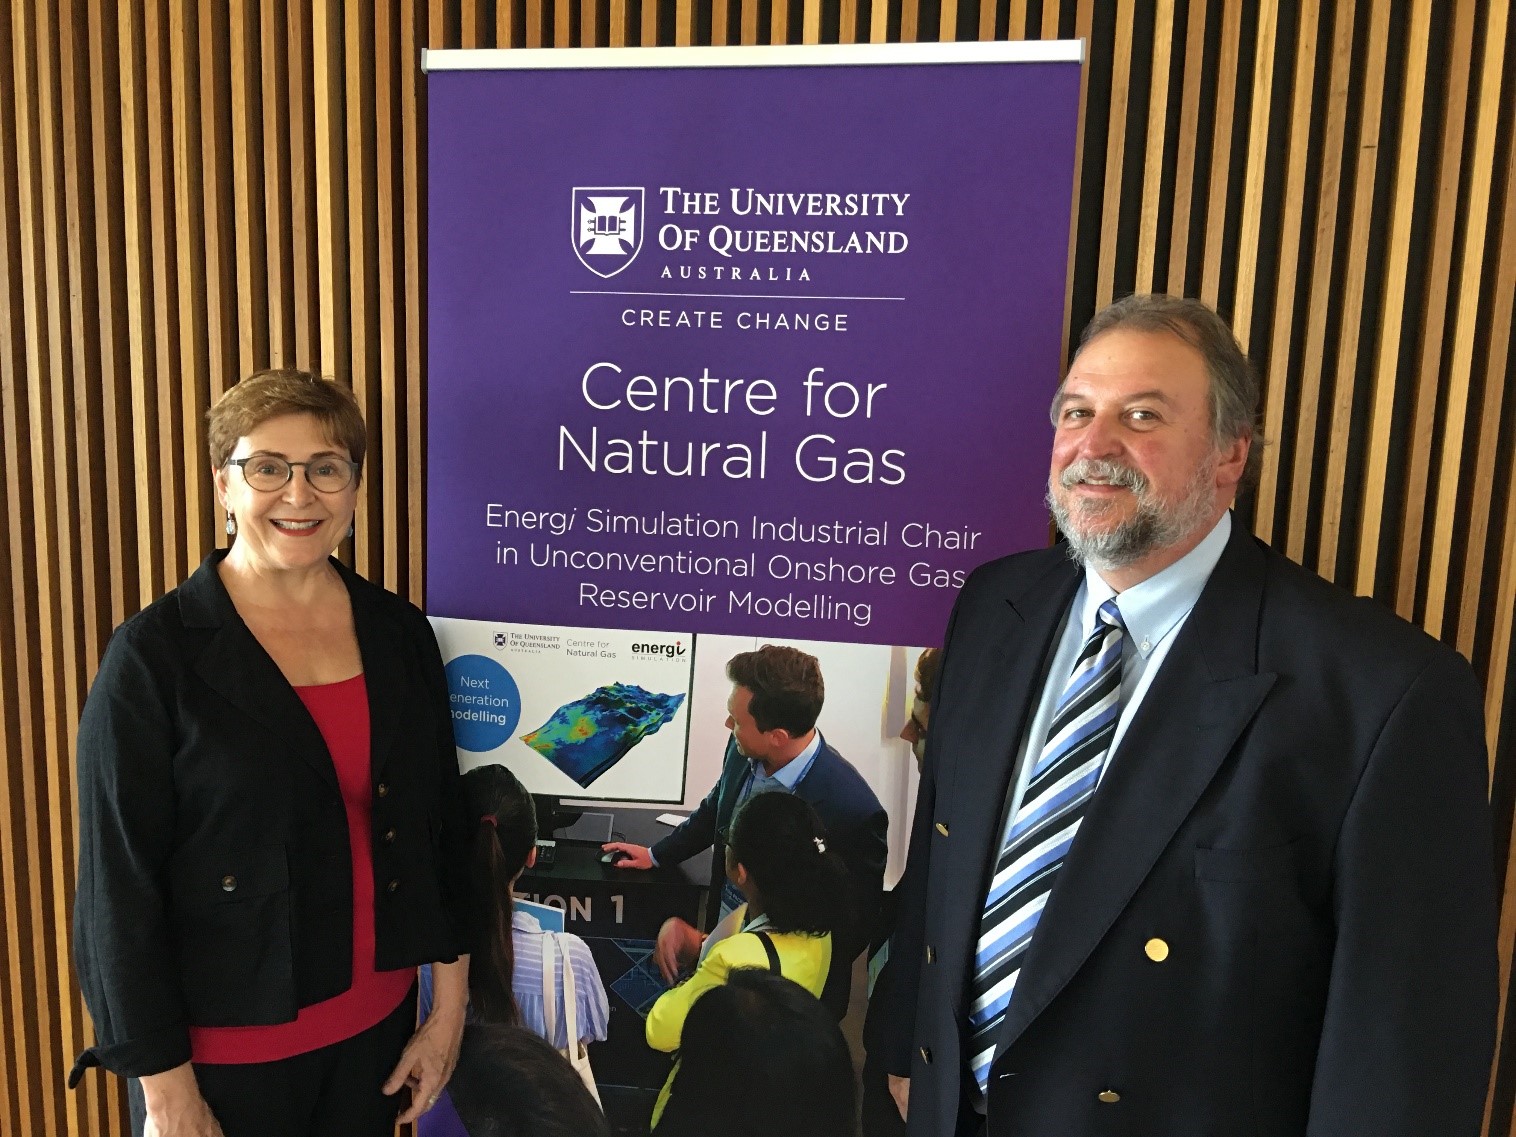 Professor Suzanne Hurter and Professor Ray Johnson will be co-chairs of the Energi Simulation onshore gas reservoir modelling program which operates out of the UQ Centre for Natural Gas